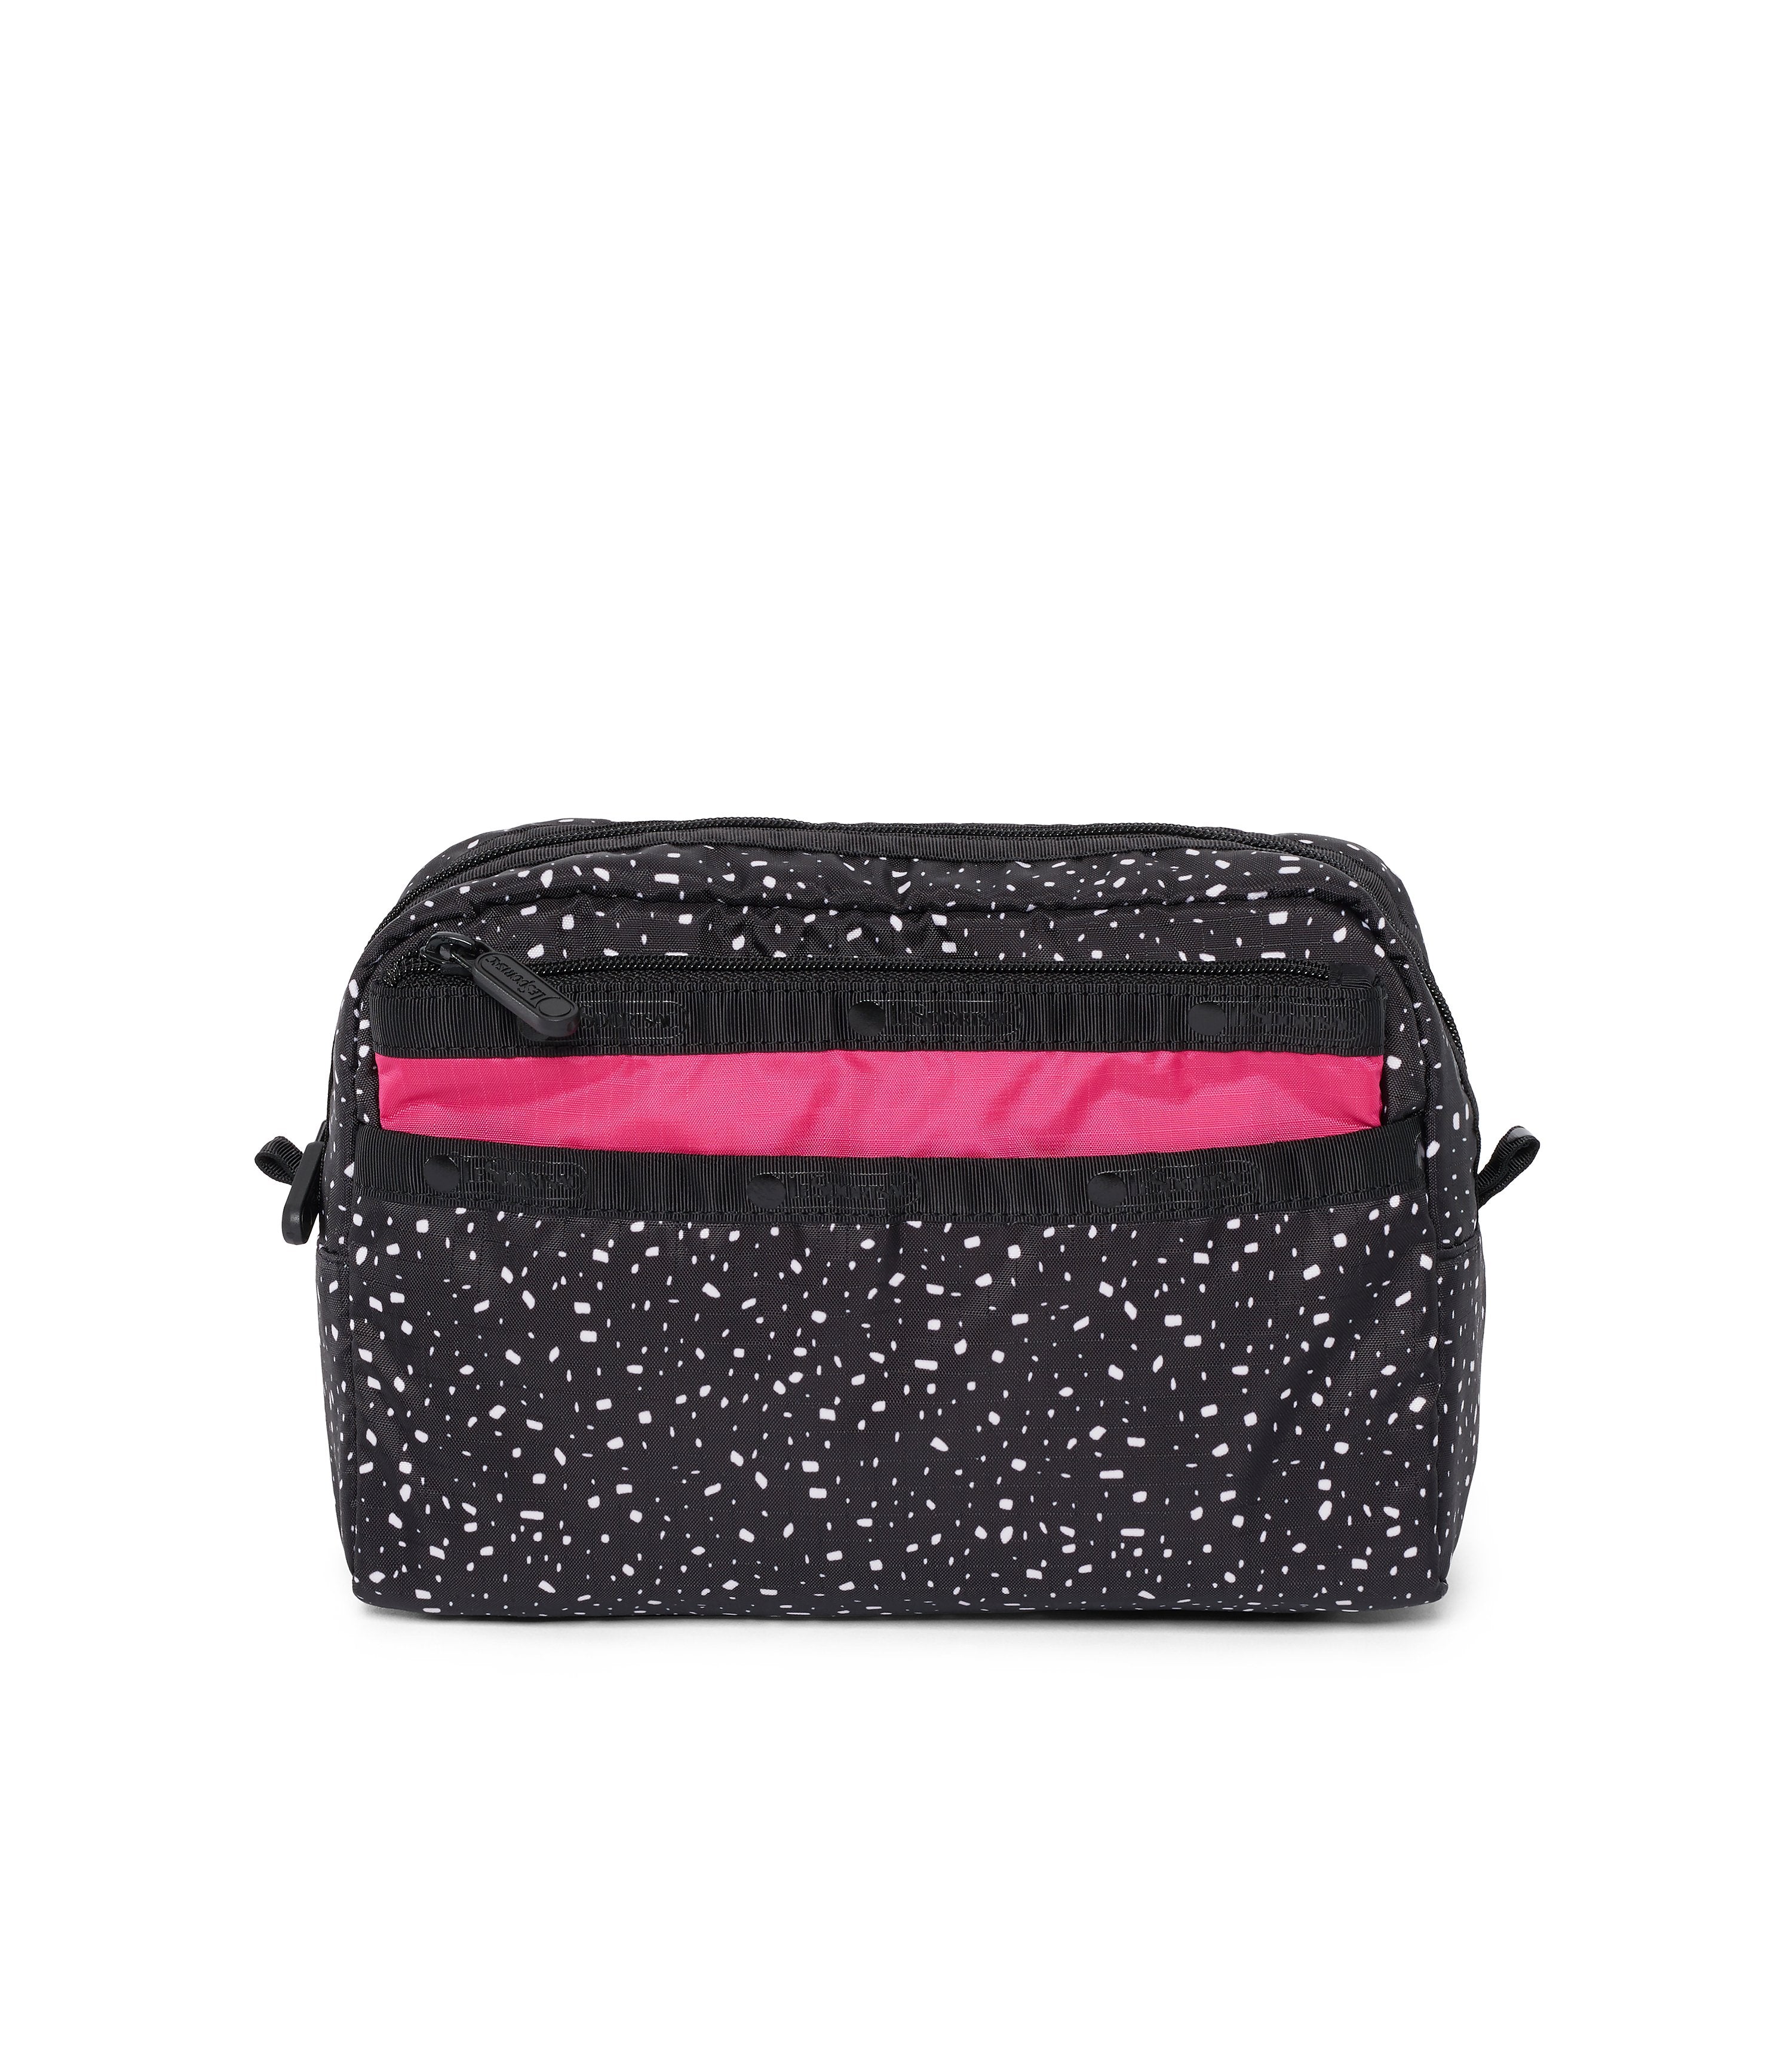 2 compartment cosmetic bag